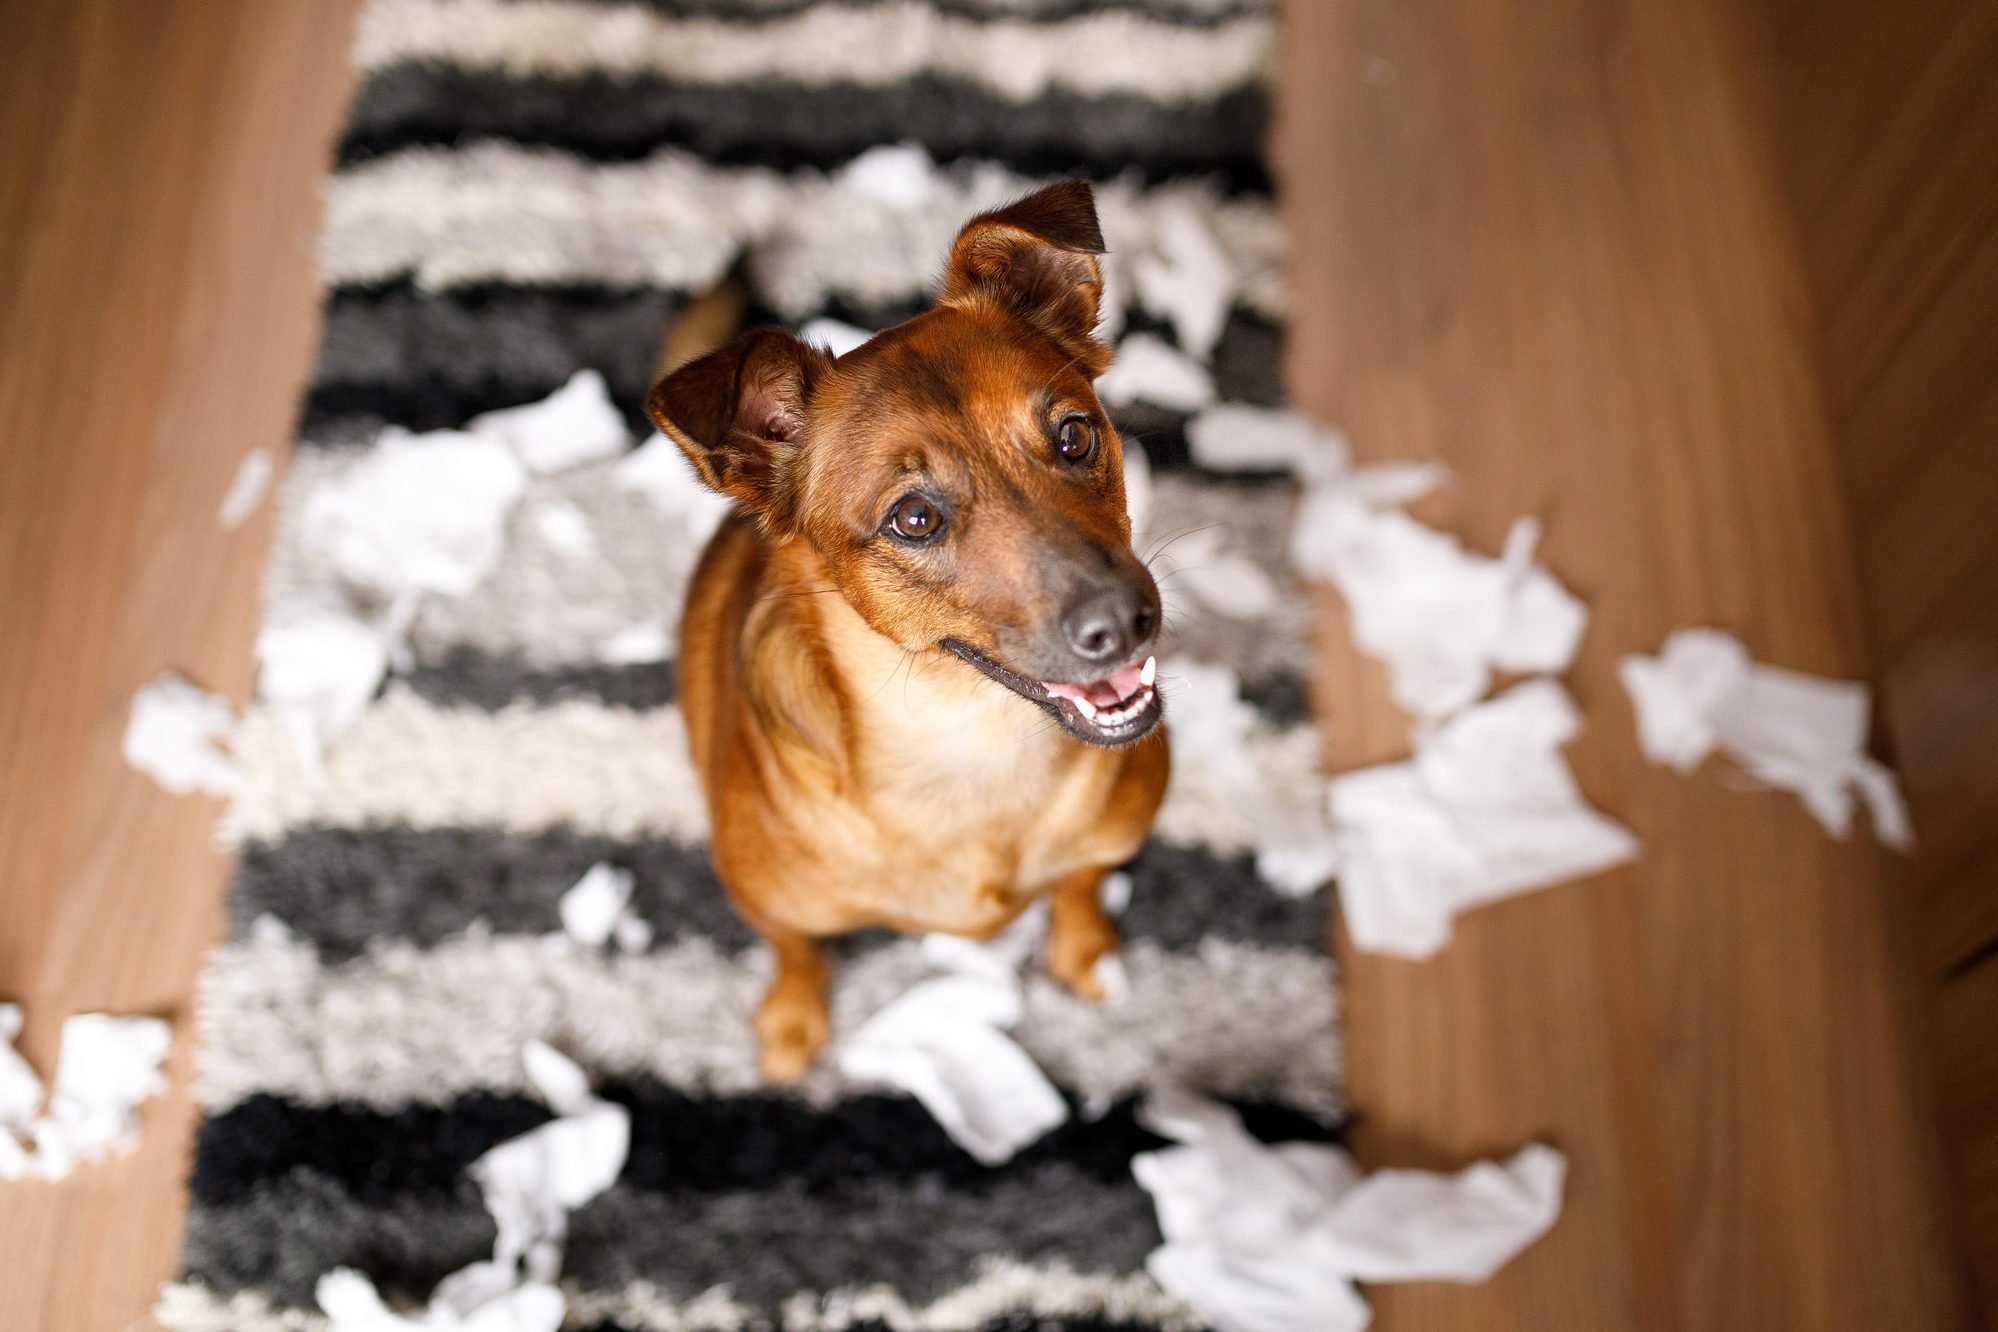 Dog proud of it's mess